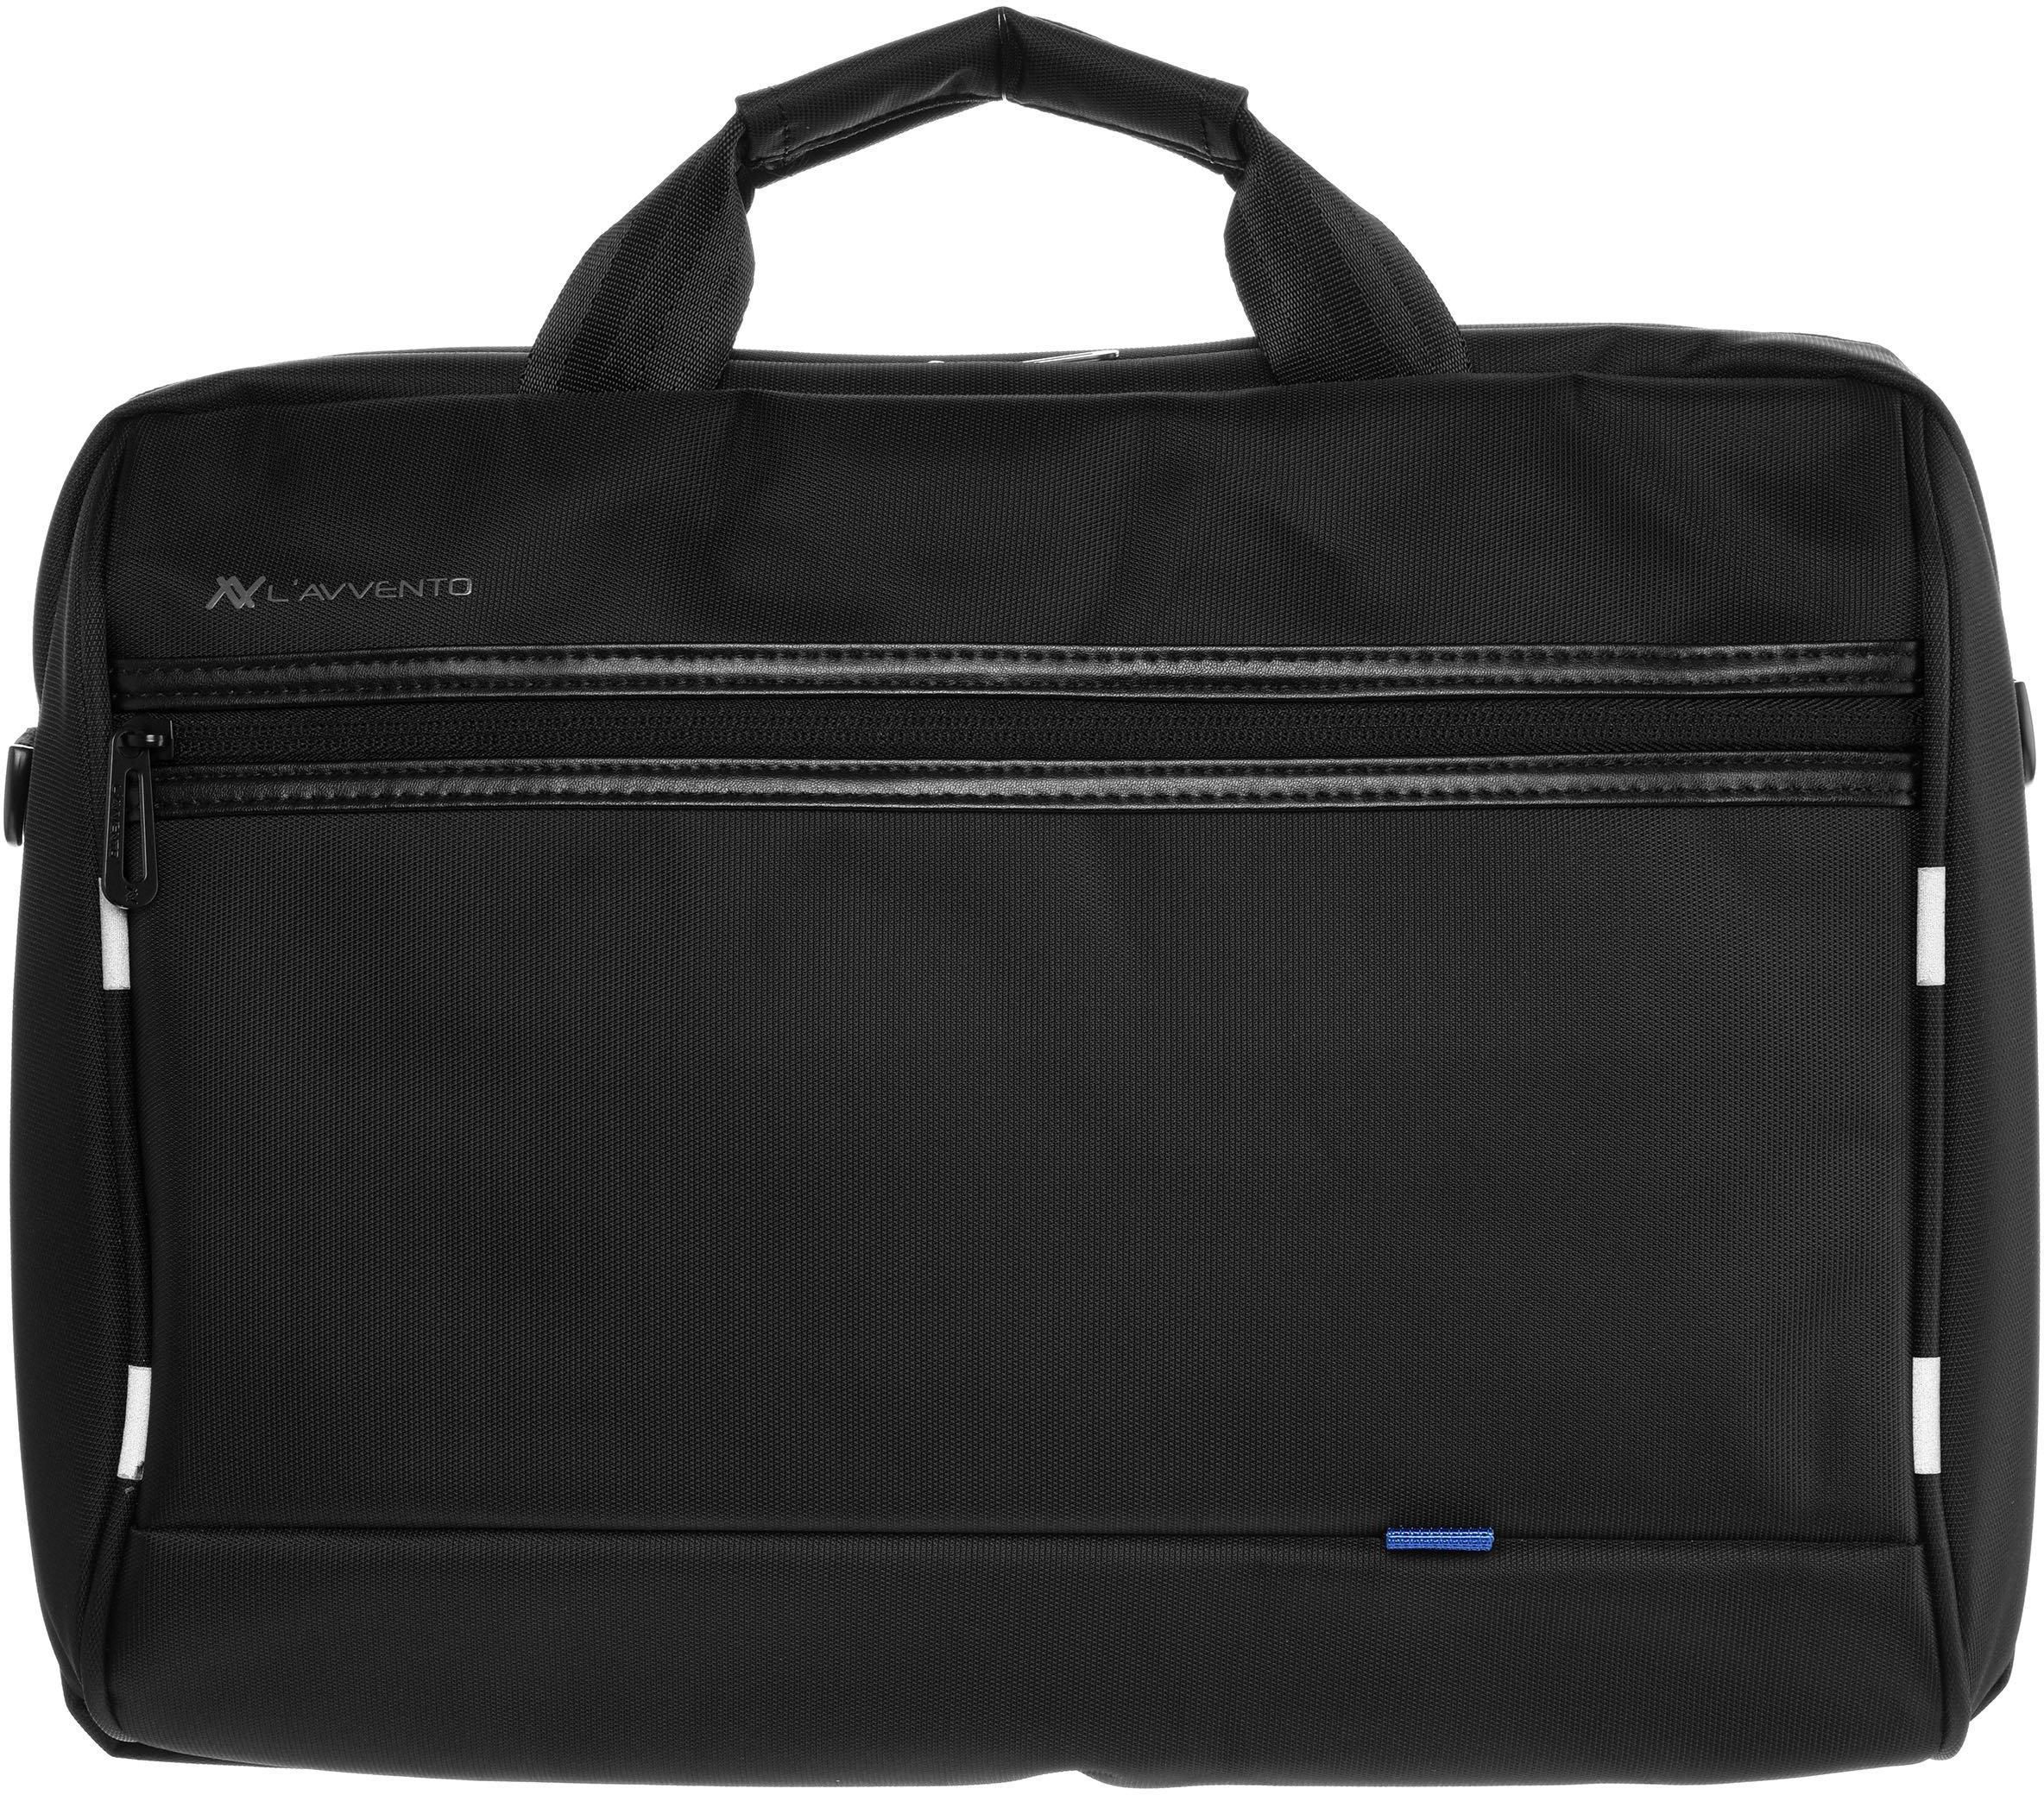 Lavvento Laptop Bag, Black, Fit Up to 15.6 inch, designed in Paris, Easy to carry, light weight case